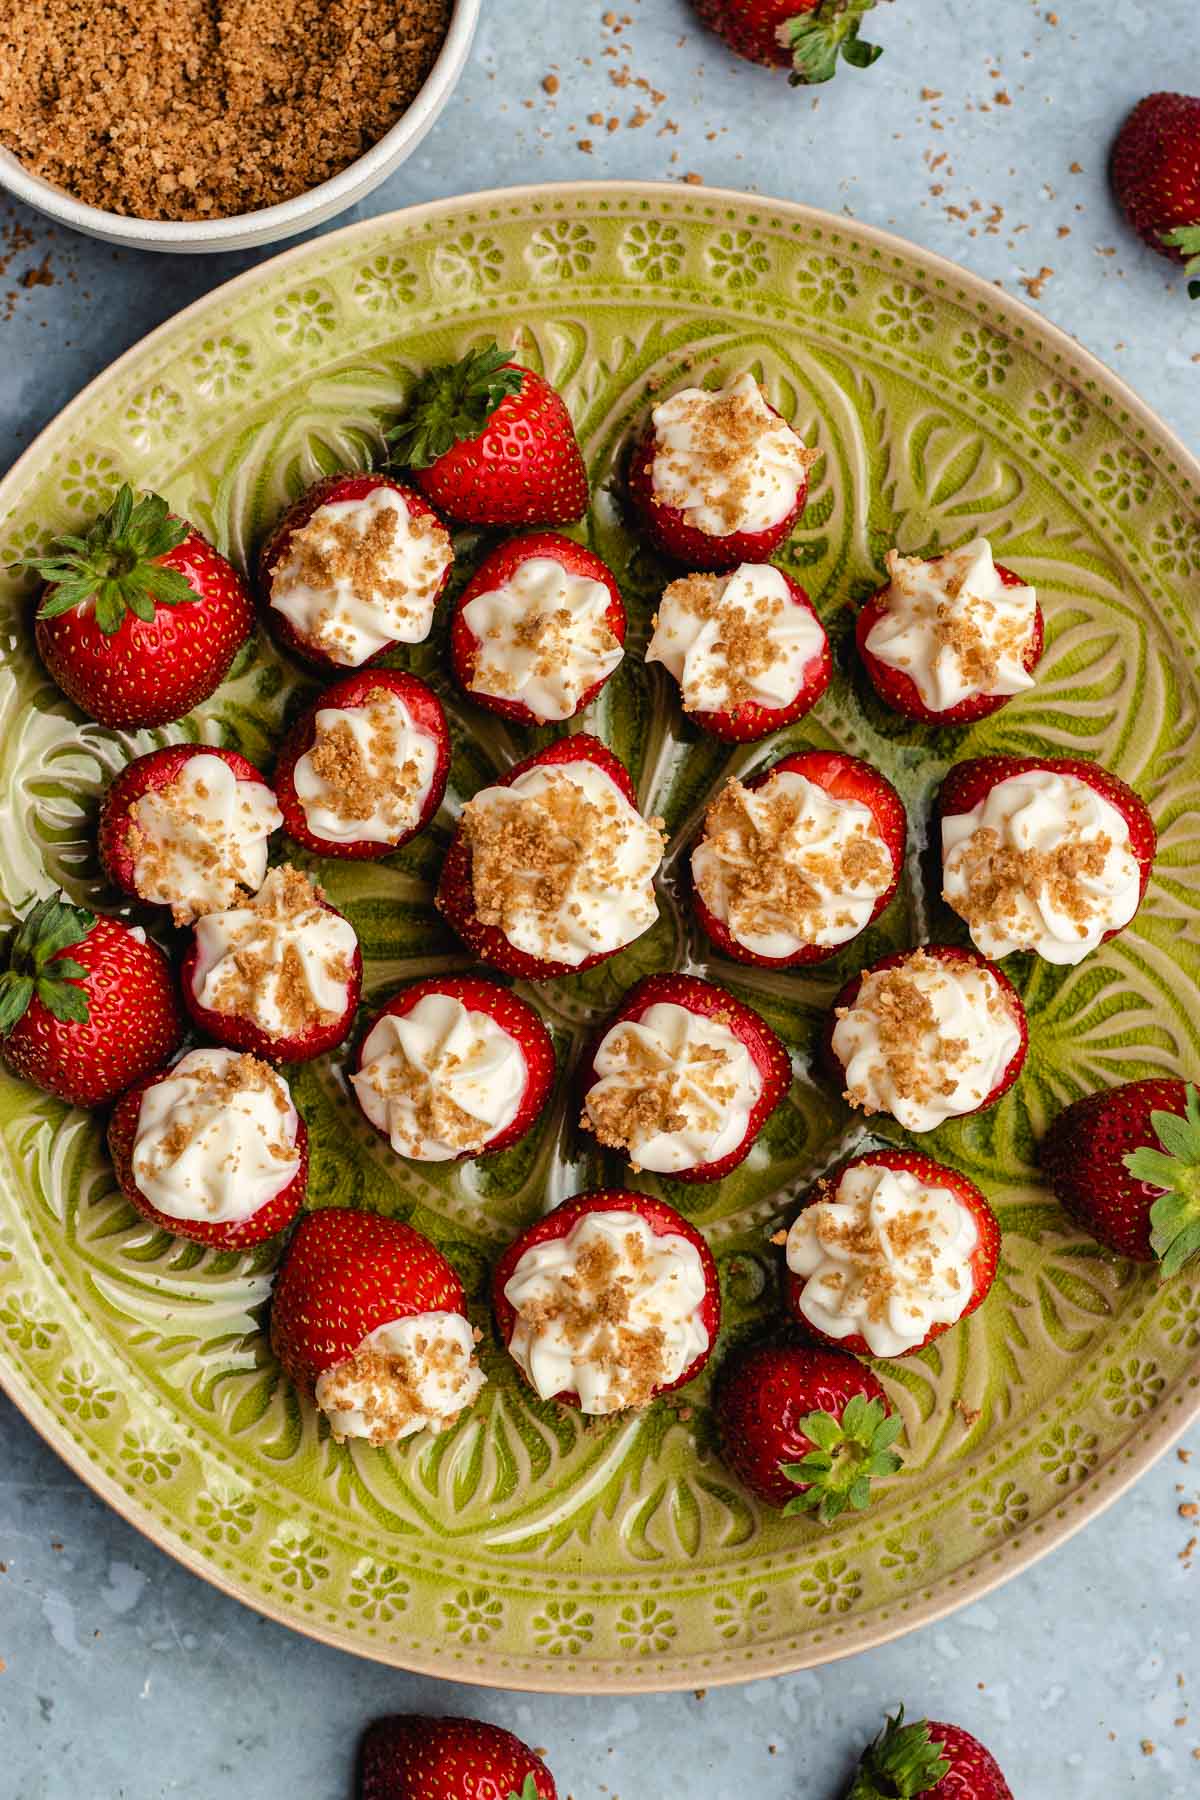 top view of stuffed strawberries on a plate